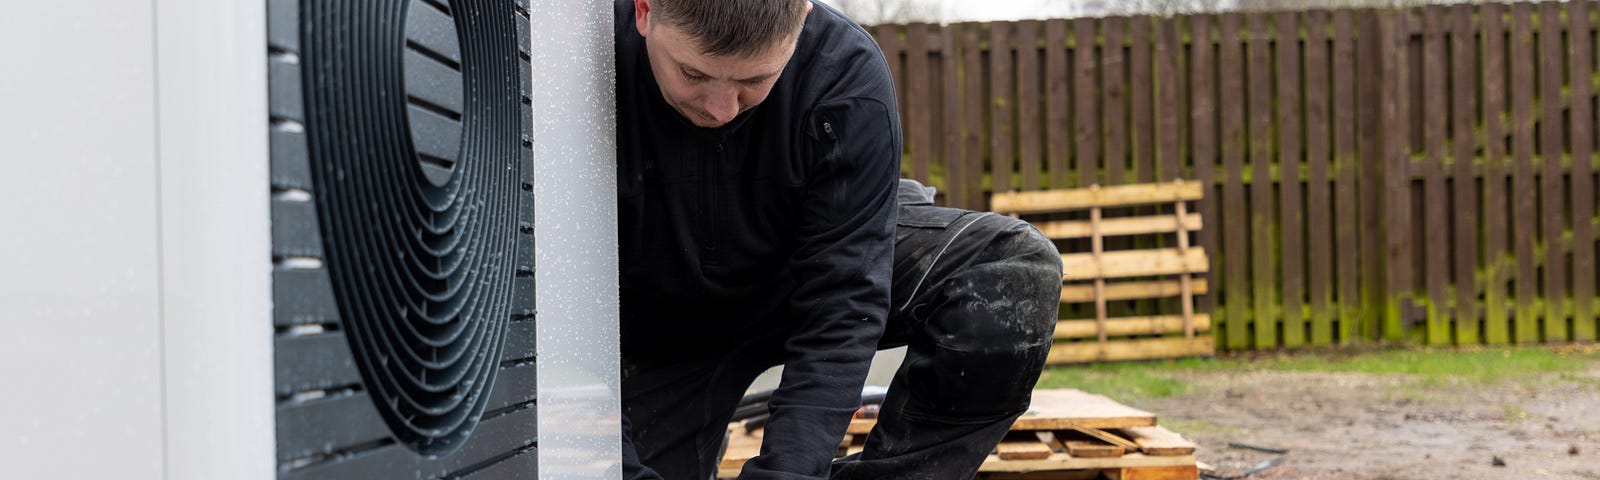 Image shows a heat pump installer working at a domestic property in Glasgow.